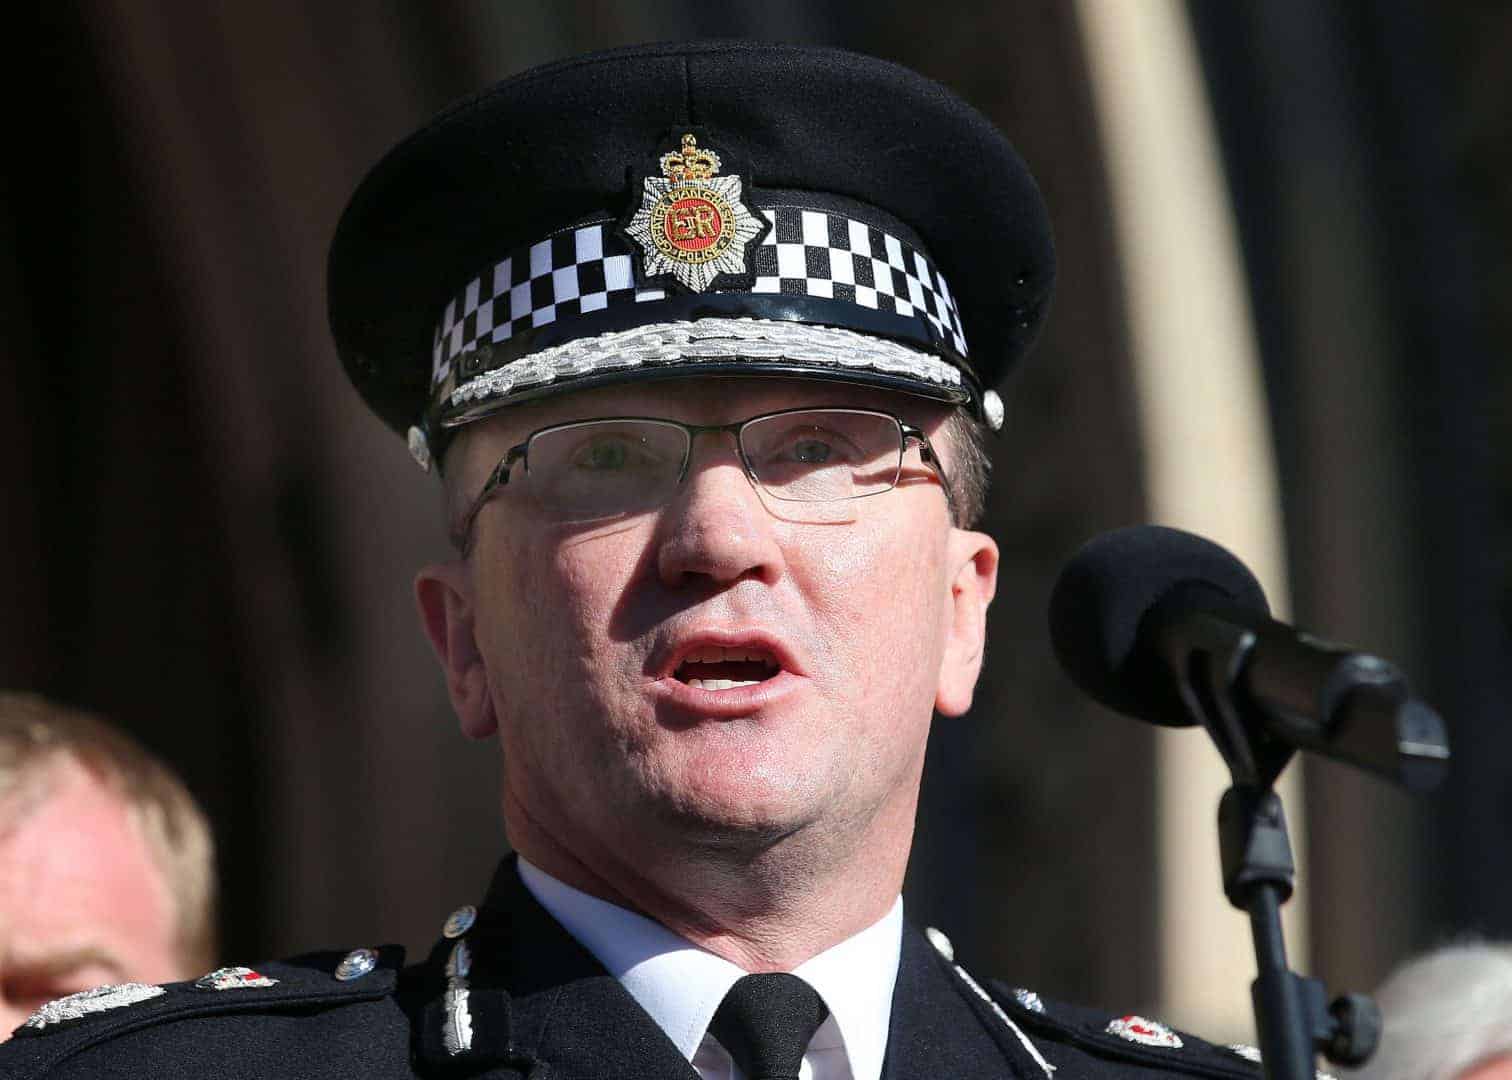 Police deny trying to stop publication of grooming investigation report to bury truth